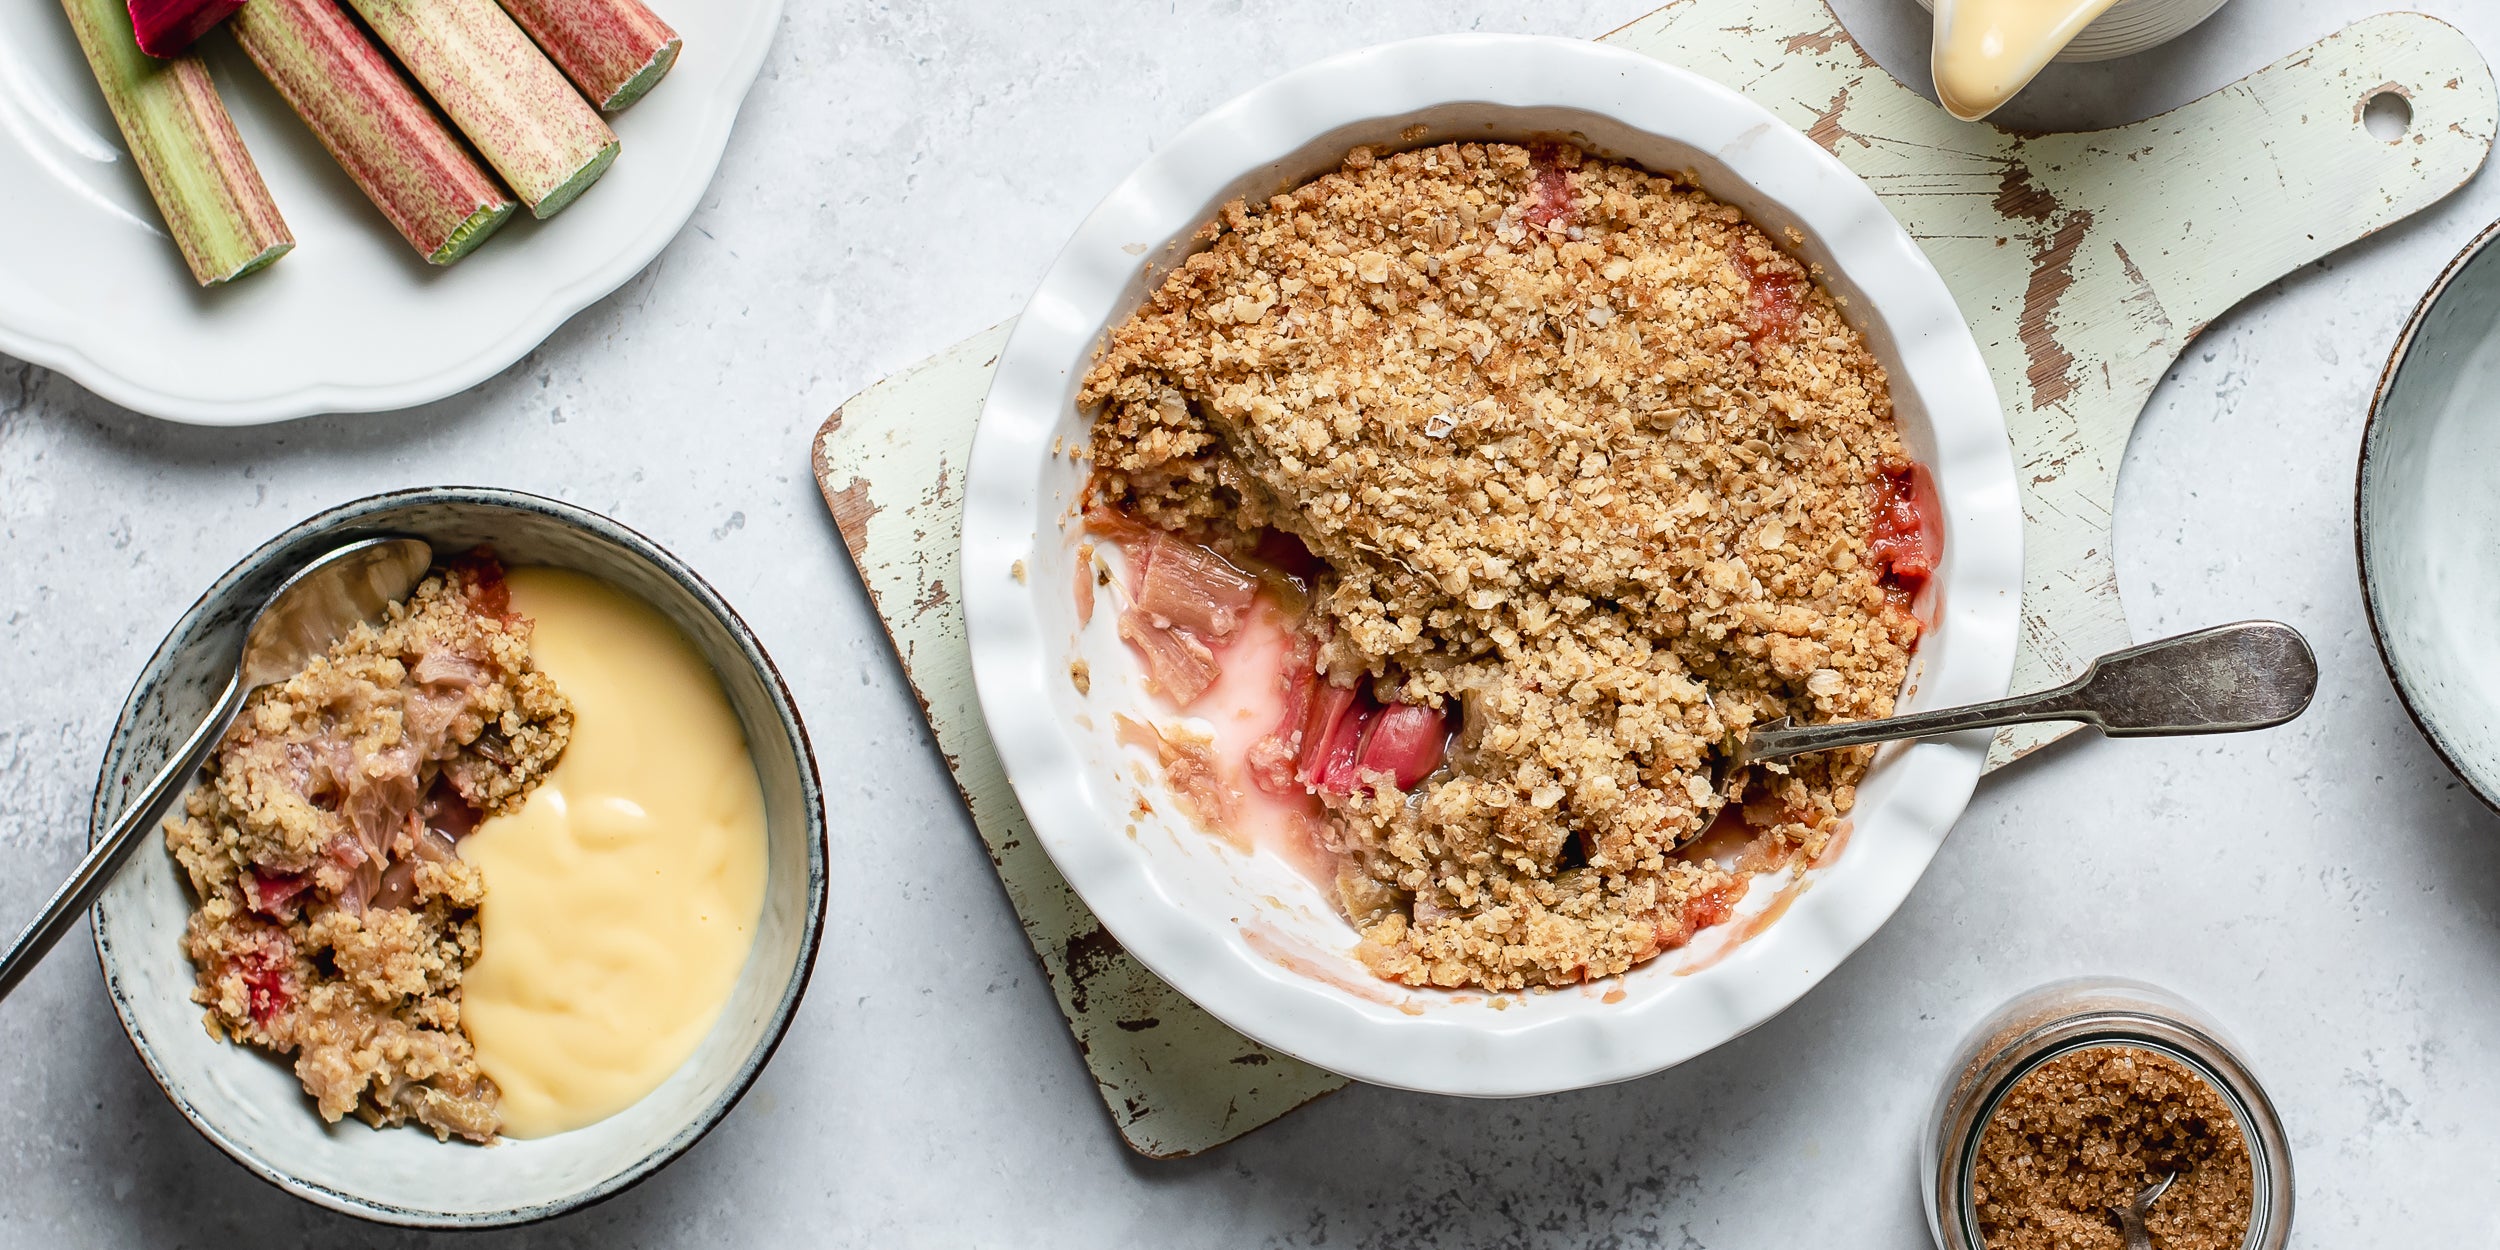 Top view of Rhubarb Crumble with a spoon serving up a portion, topped with vanilla custard